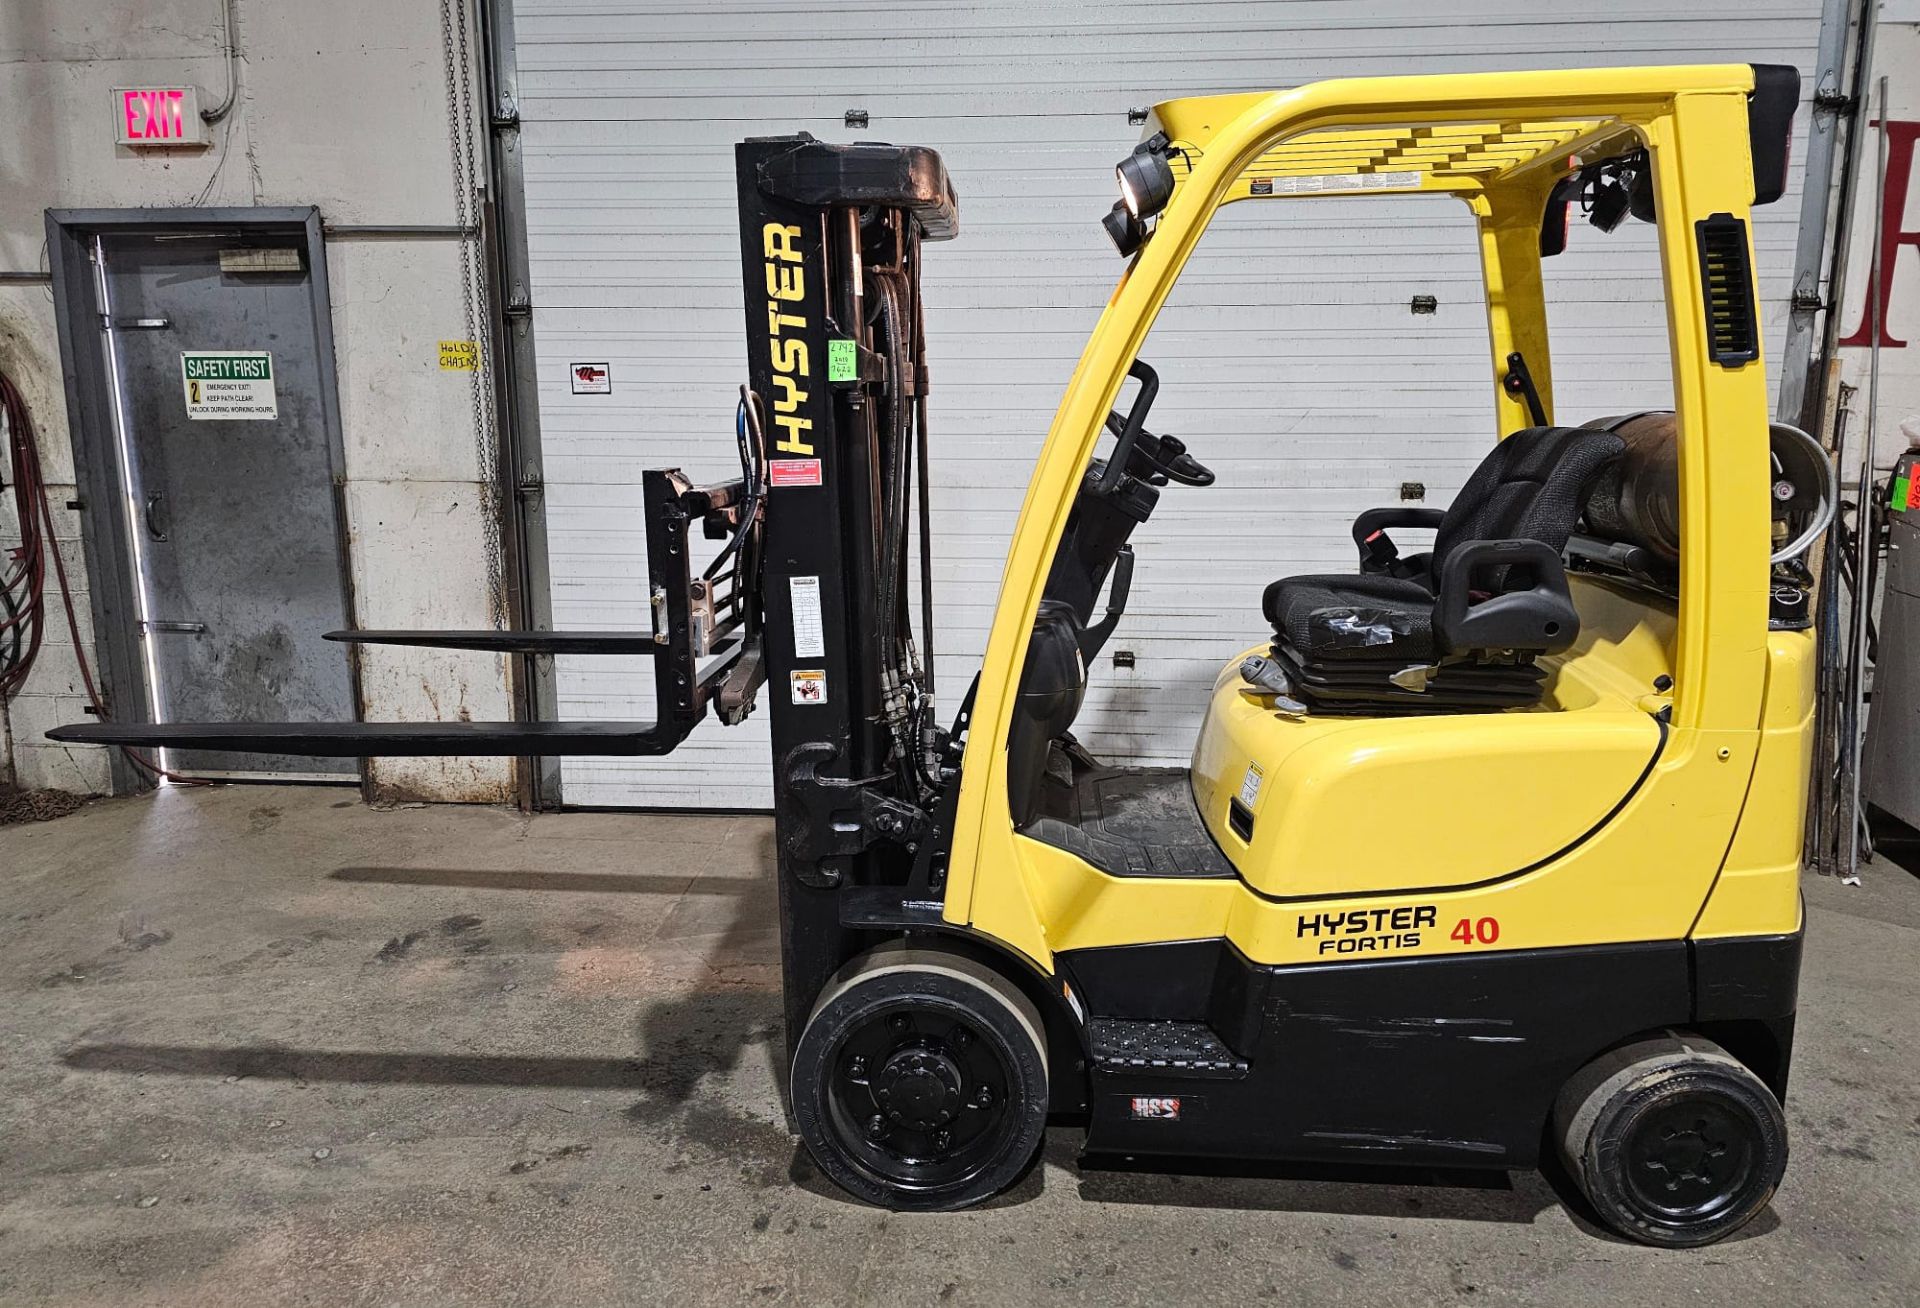 2019 Hyster 4,000lbs Capacity LPG (Propane) Forklift with sideshift 3-Stage Mast(no propane tank